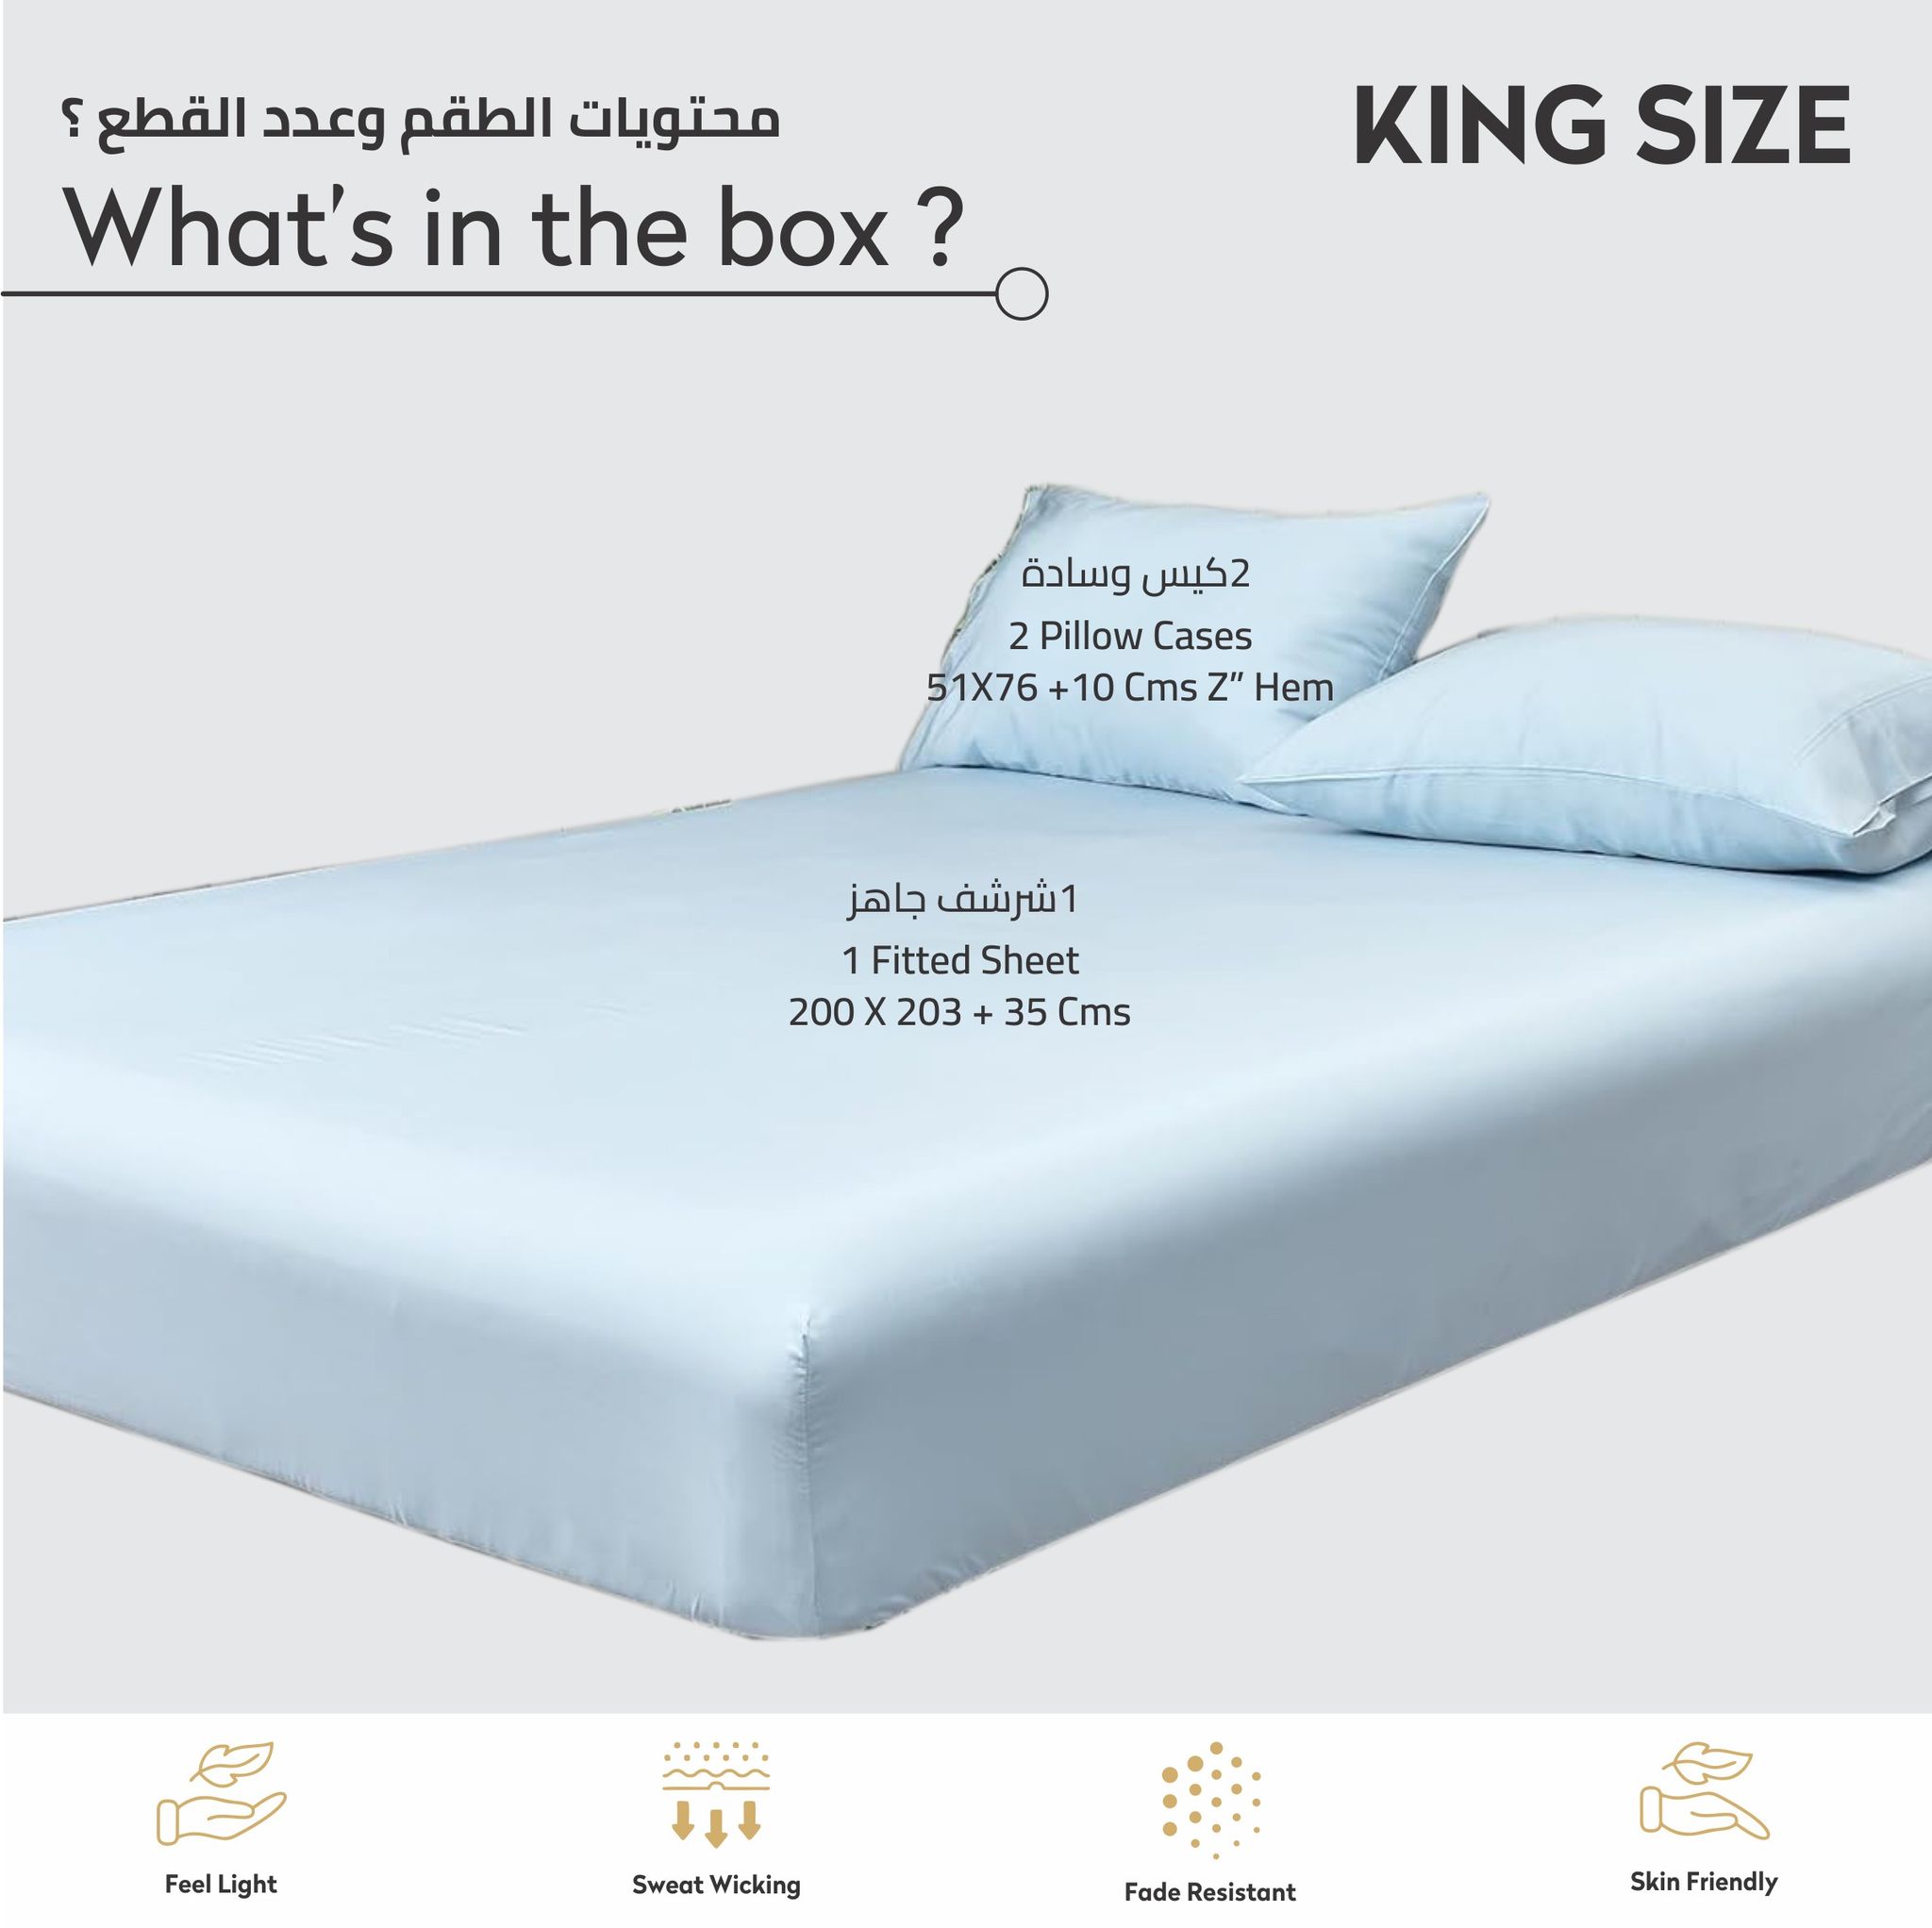 Bedding Fitted Sheet: 3-Pcs King Size Solid Sheet With Pillowcases Set and Soft-Silky 30 Cm Extra Deep Brushed Microfiber Cooling Bed Sheet,Sky Blue